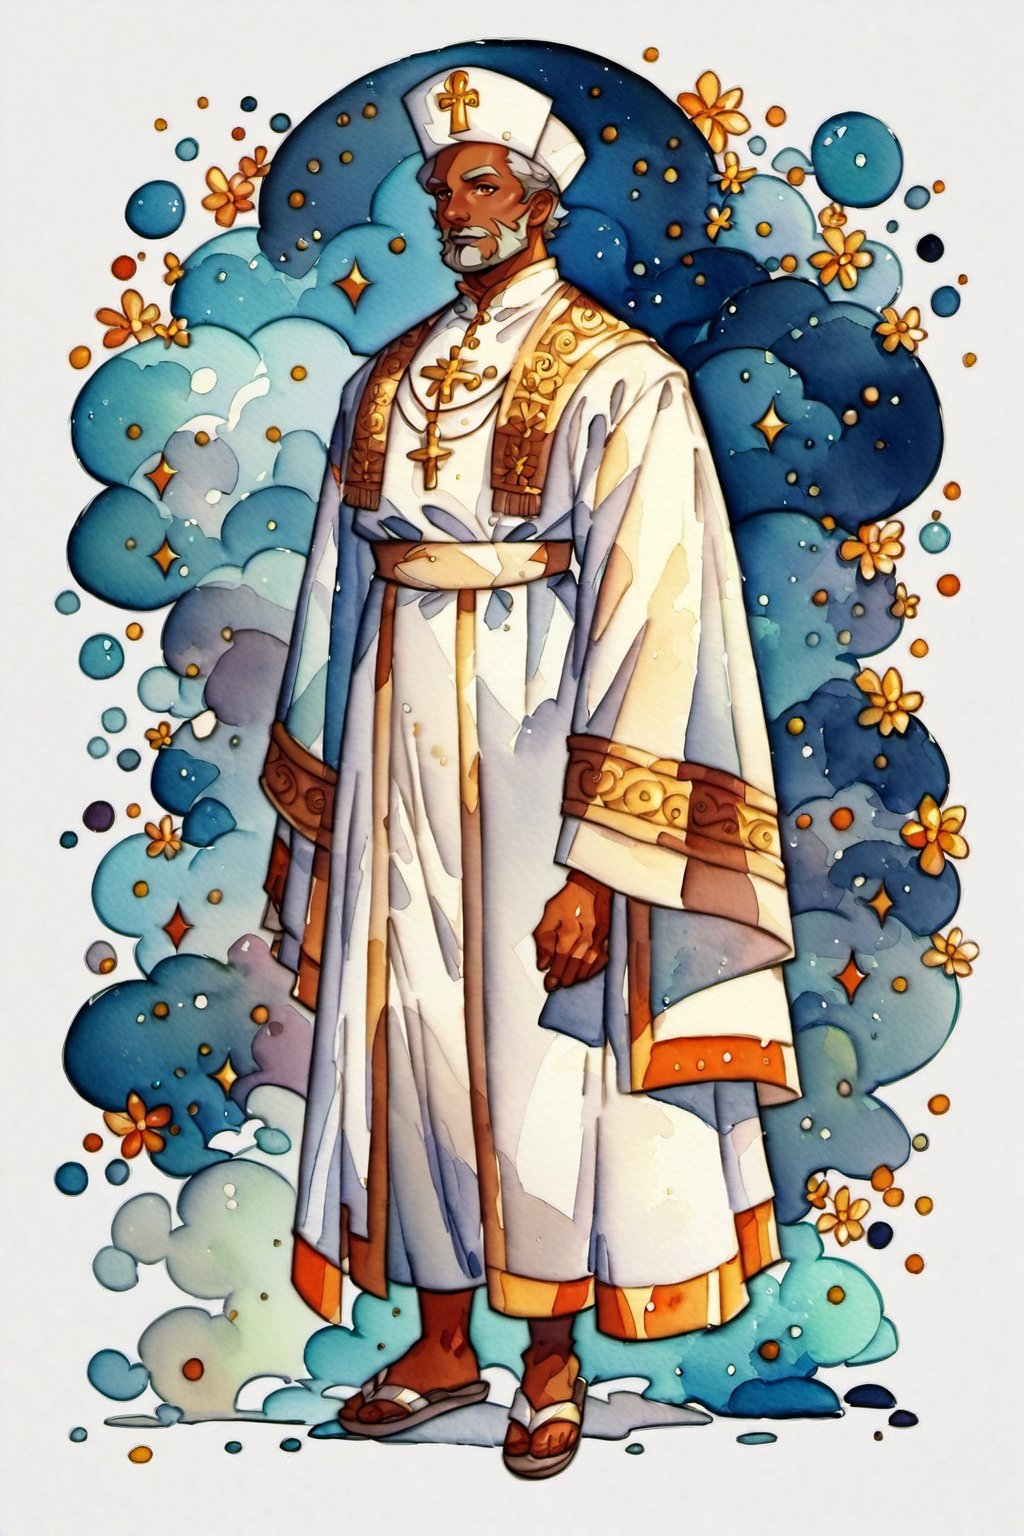 ((watercolor illustration on parchment)) score_9, score_8, score_7_up, elderly male priest with wrinkly brown skin, grey hair, gold and white robes, priest hat, sandals, white background, full body shot, solo, 1 person, masterpiece,JediStyle,KA